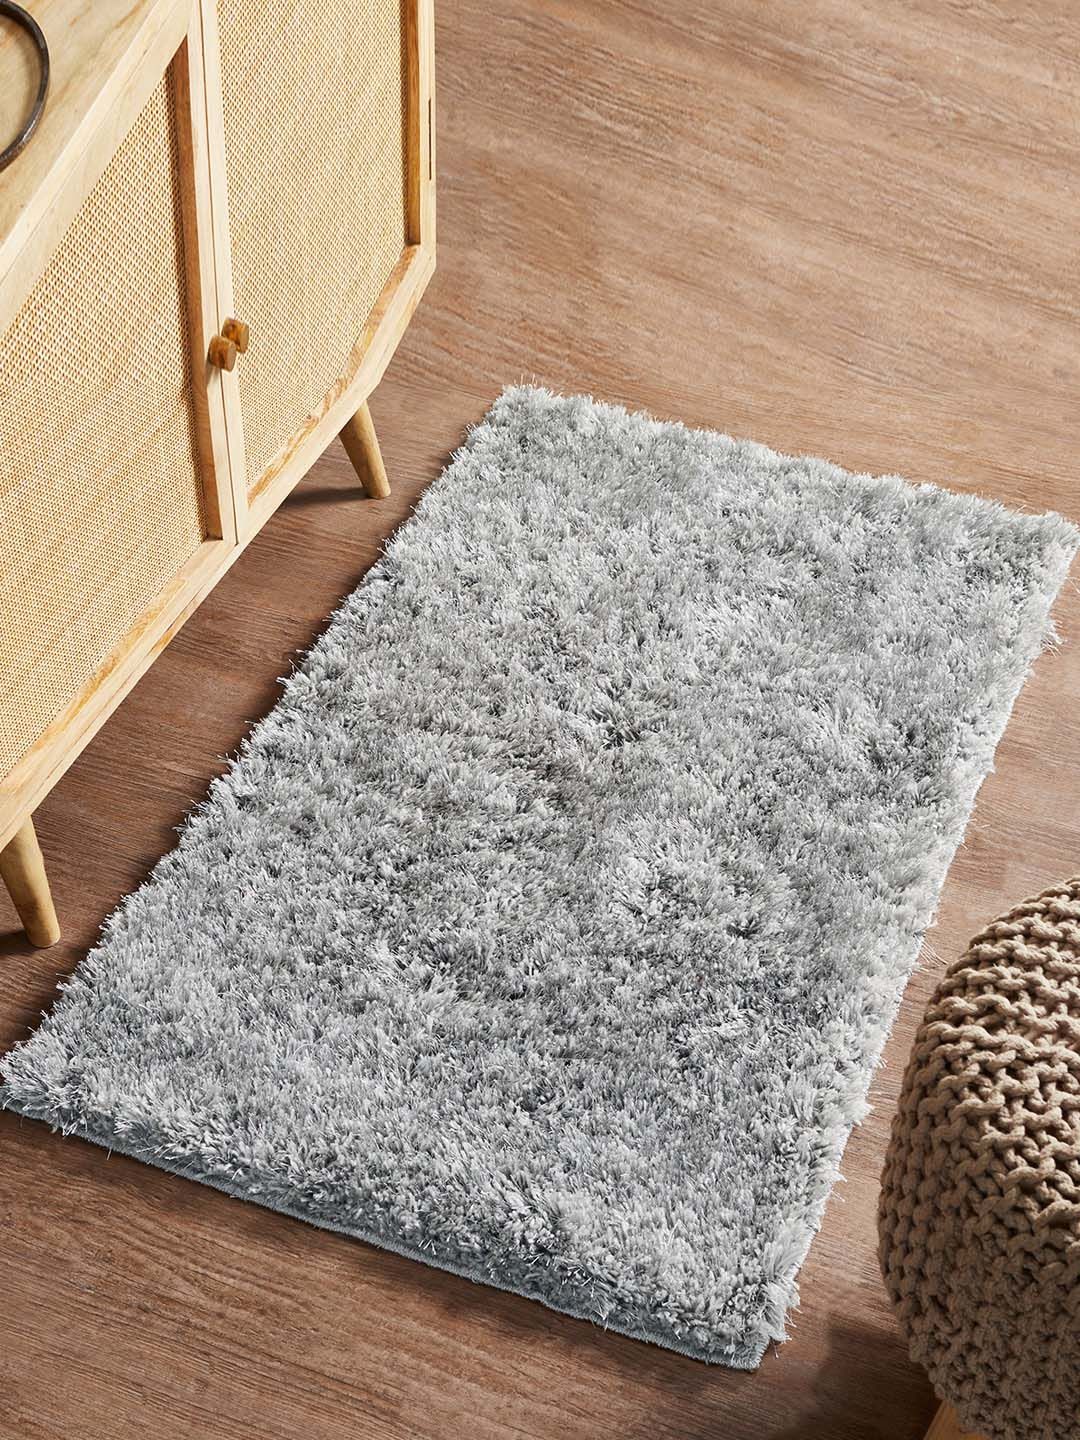 Pano Grey Solid 2400 GSM Anti-Slip Bath Rugs Price in India